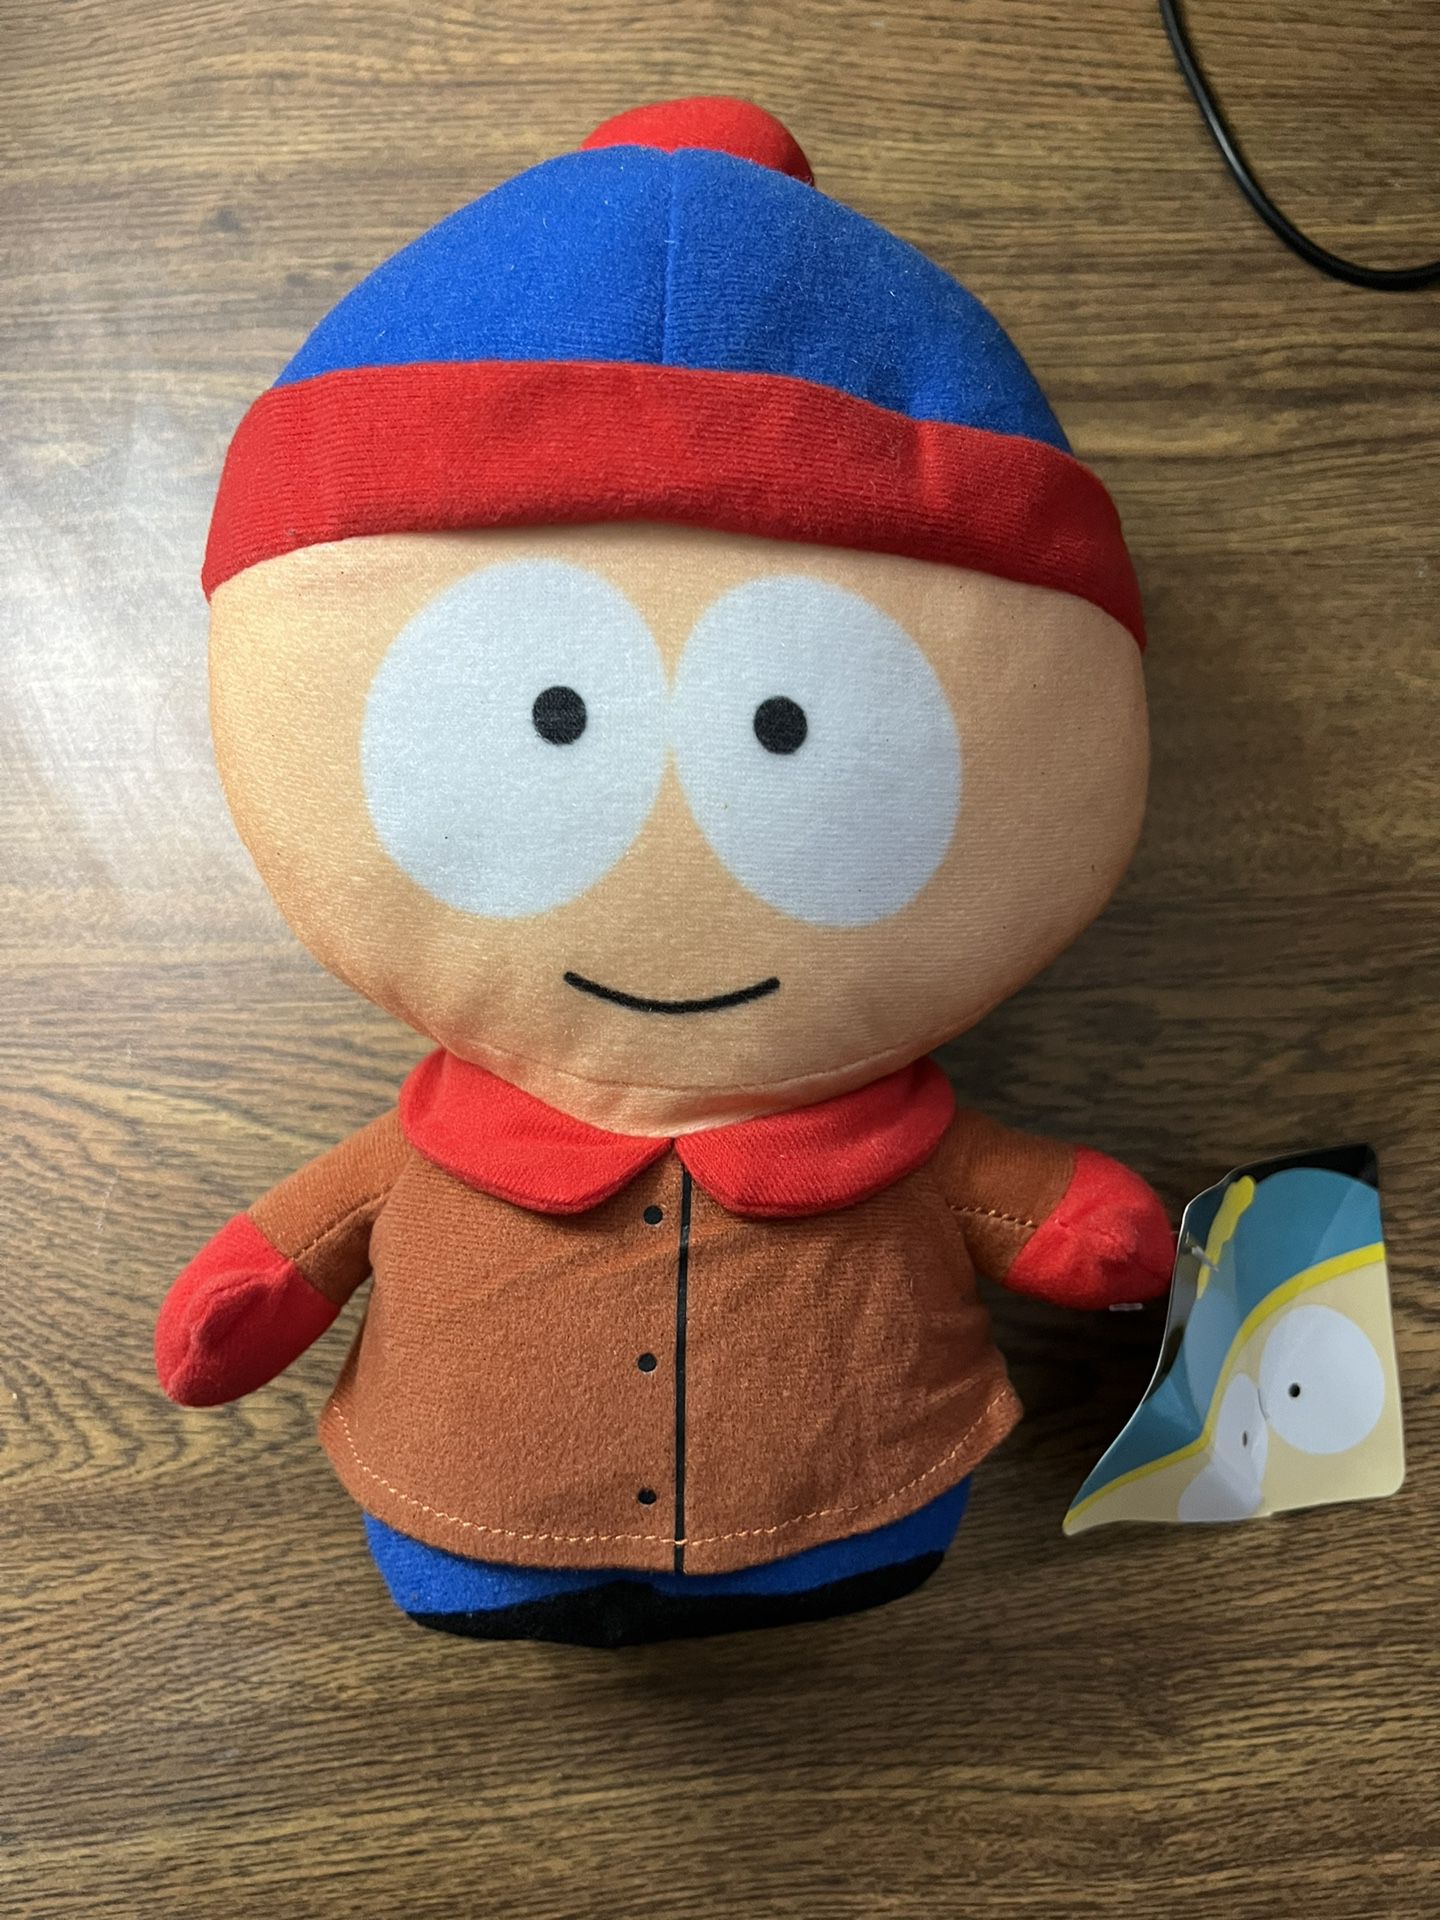 South Park Plush Toy Factory Comedy Central Cartoon Stan 9" Plush Toy Stuffed